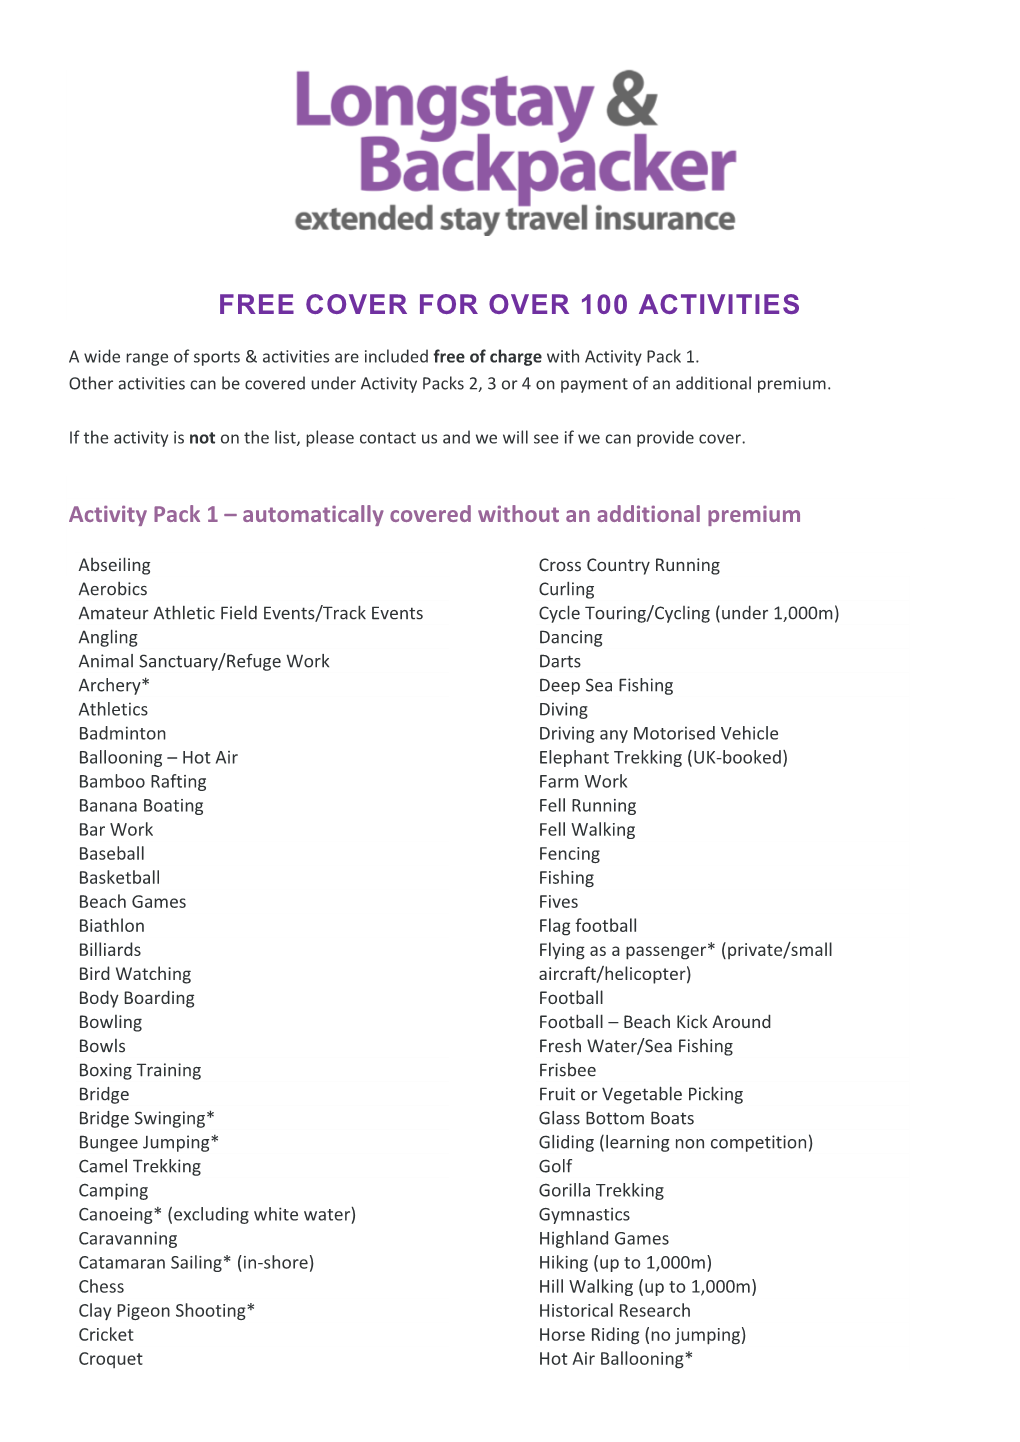 Free Cover for Over 100 Activities